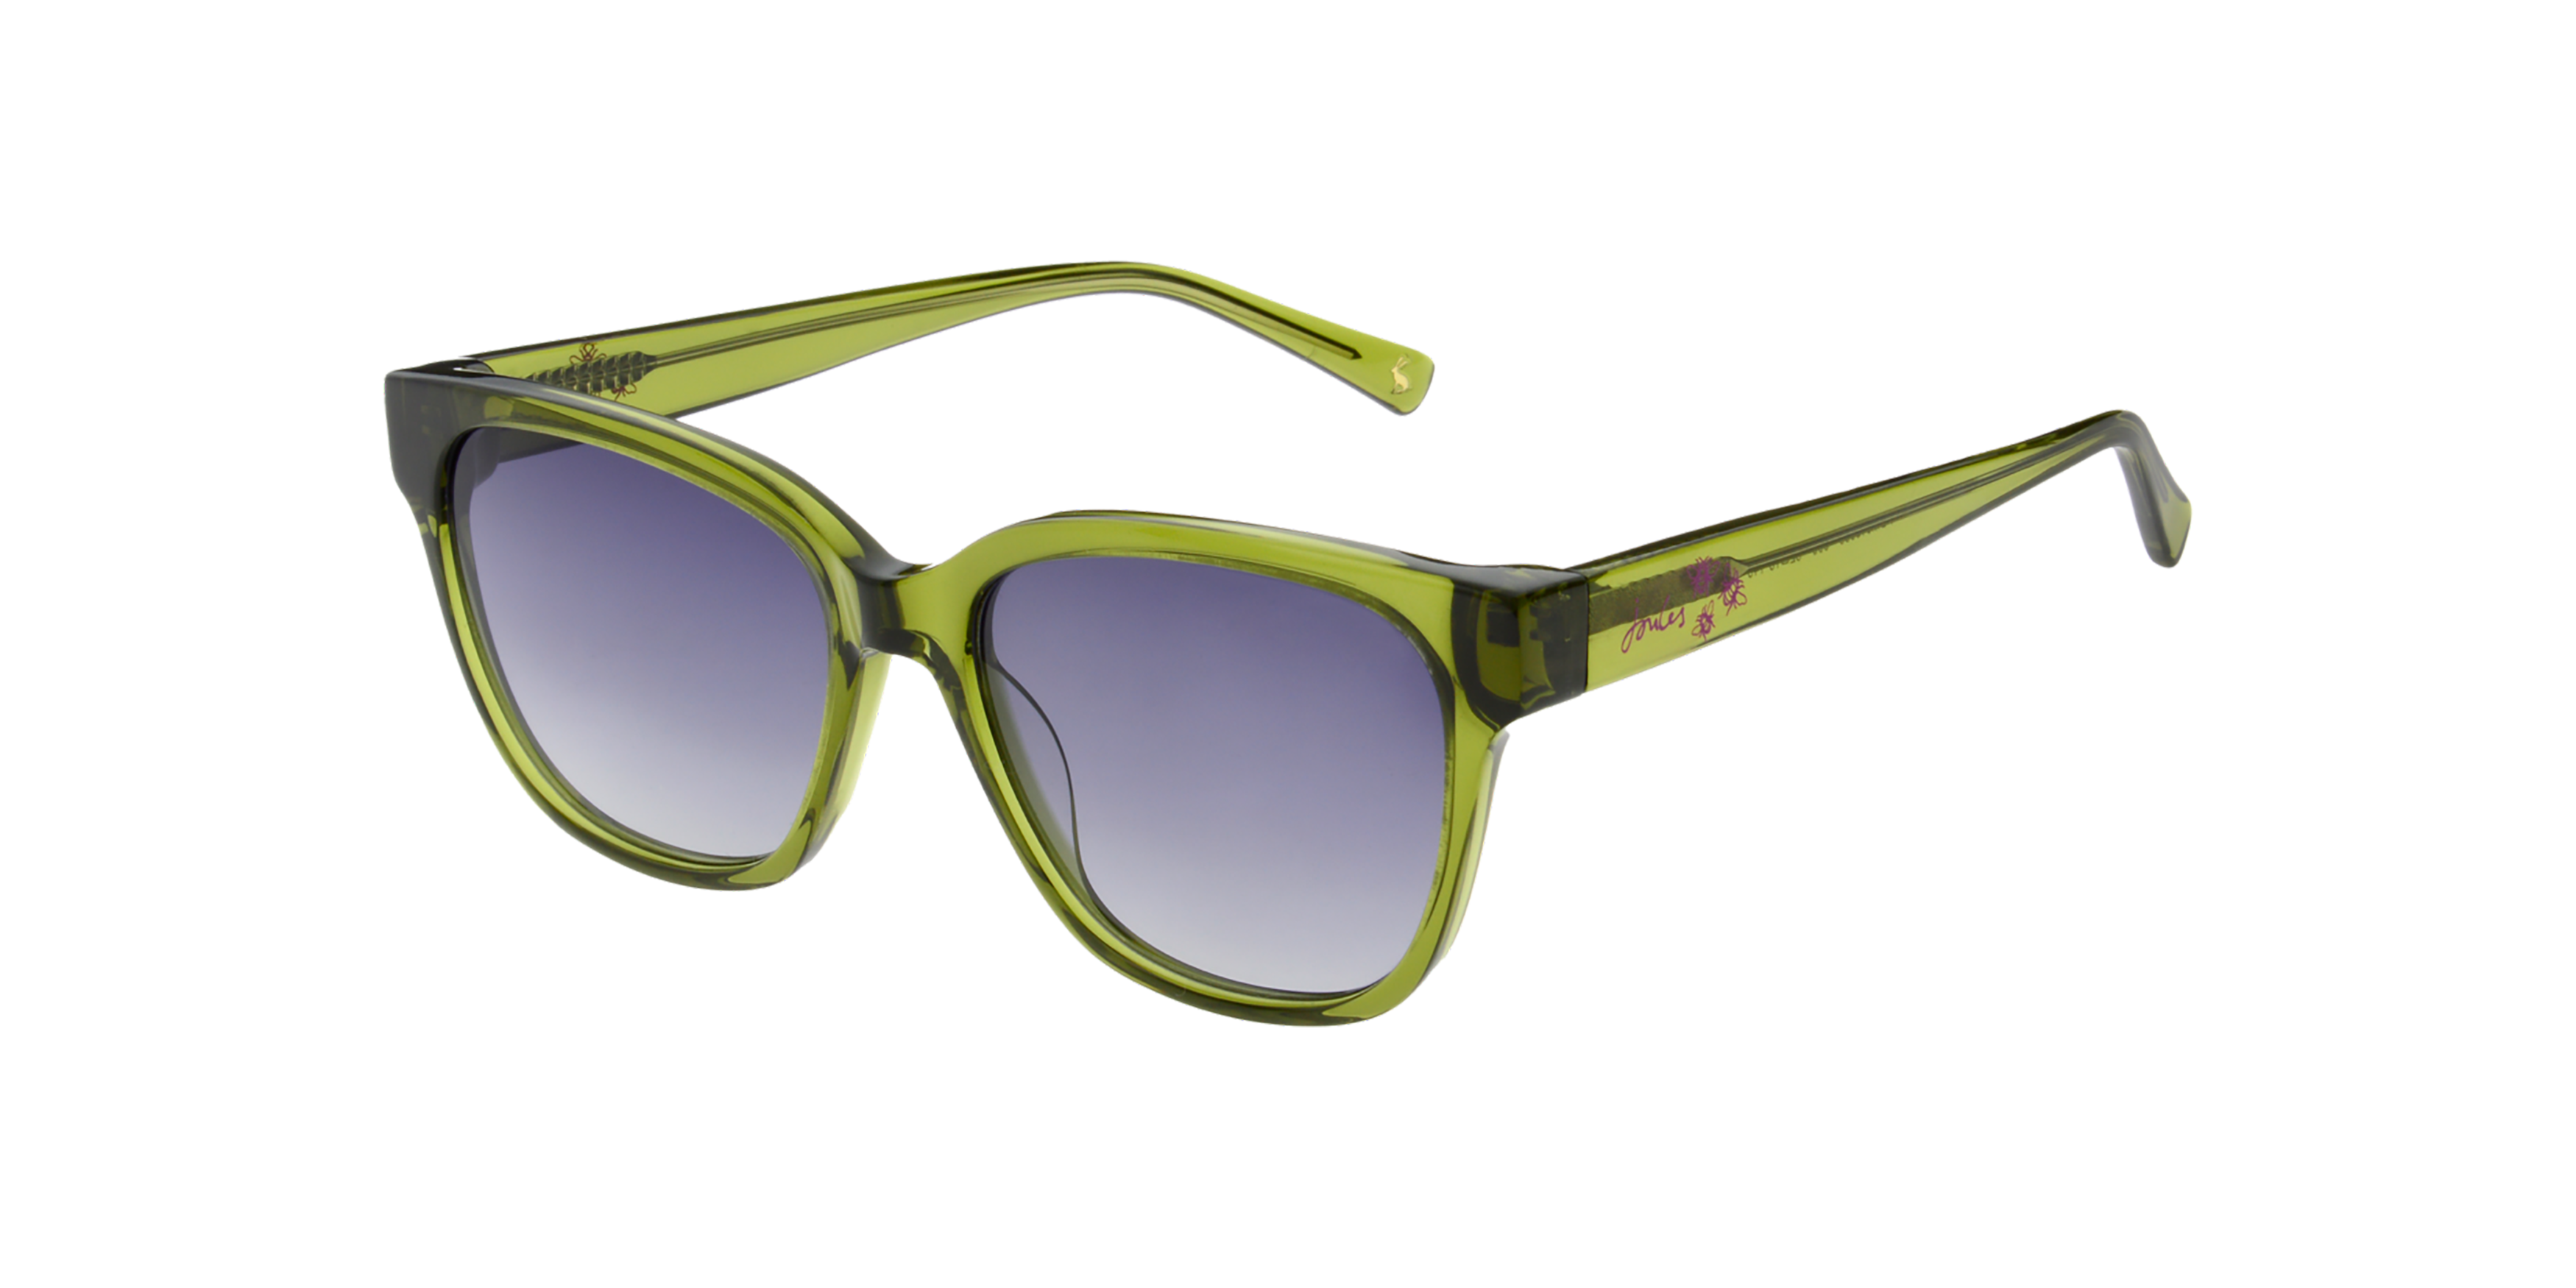 Angle_Left01 Joules 7078 Sunglasses Grey / Green